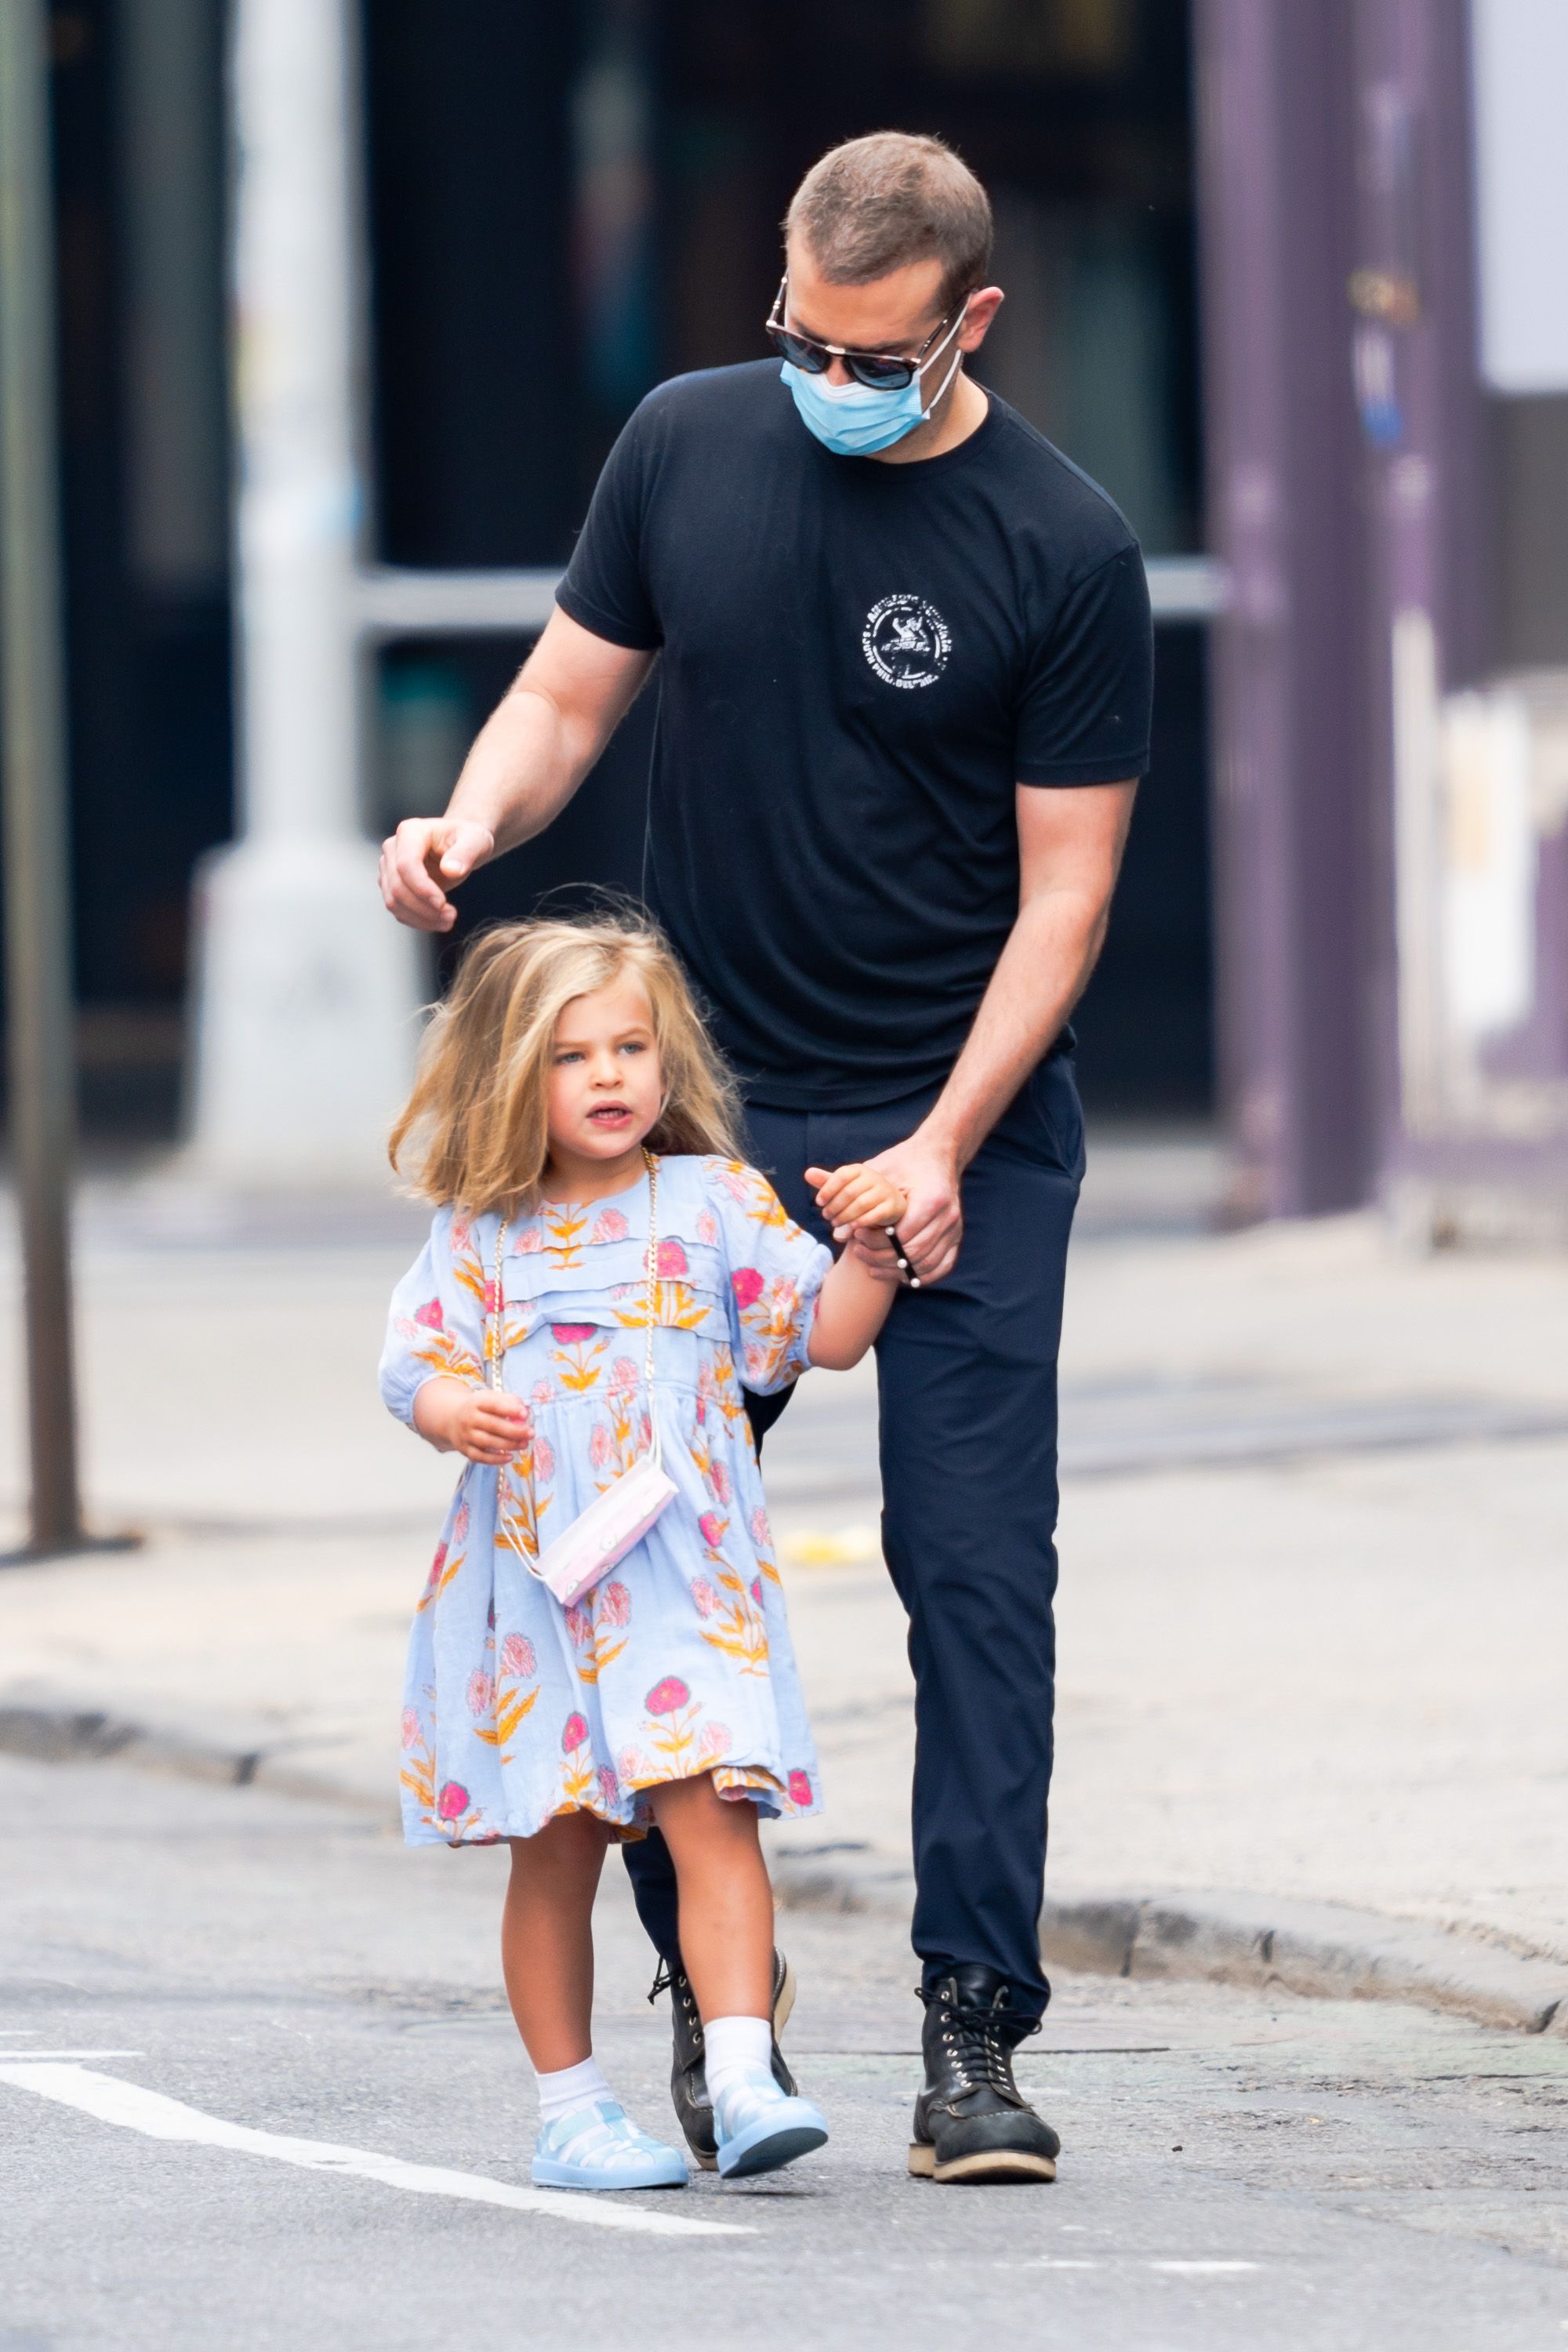 Bradley Cooper and his daughter Lea Cooper are seen in West Village, New York City on May 26, 2021. | Source: Getty Images